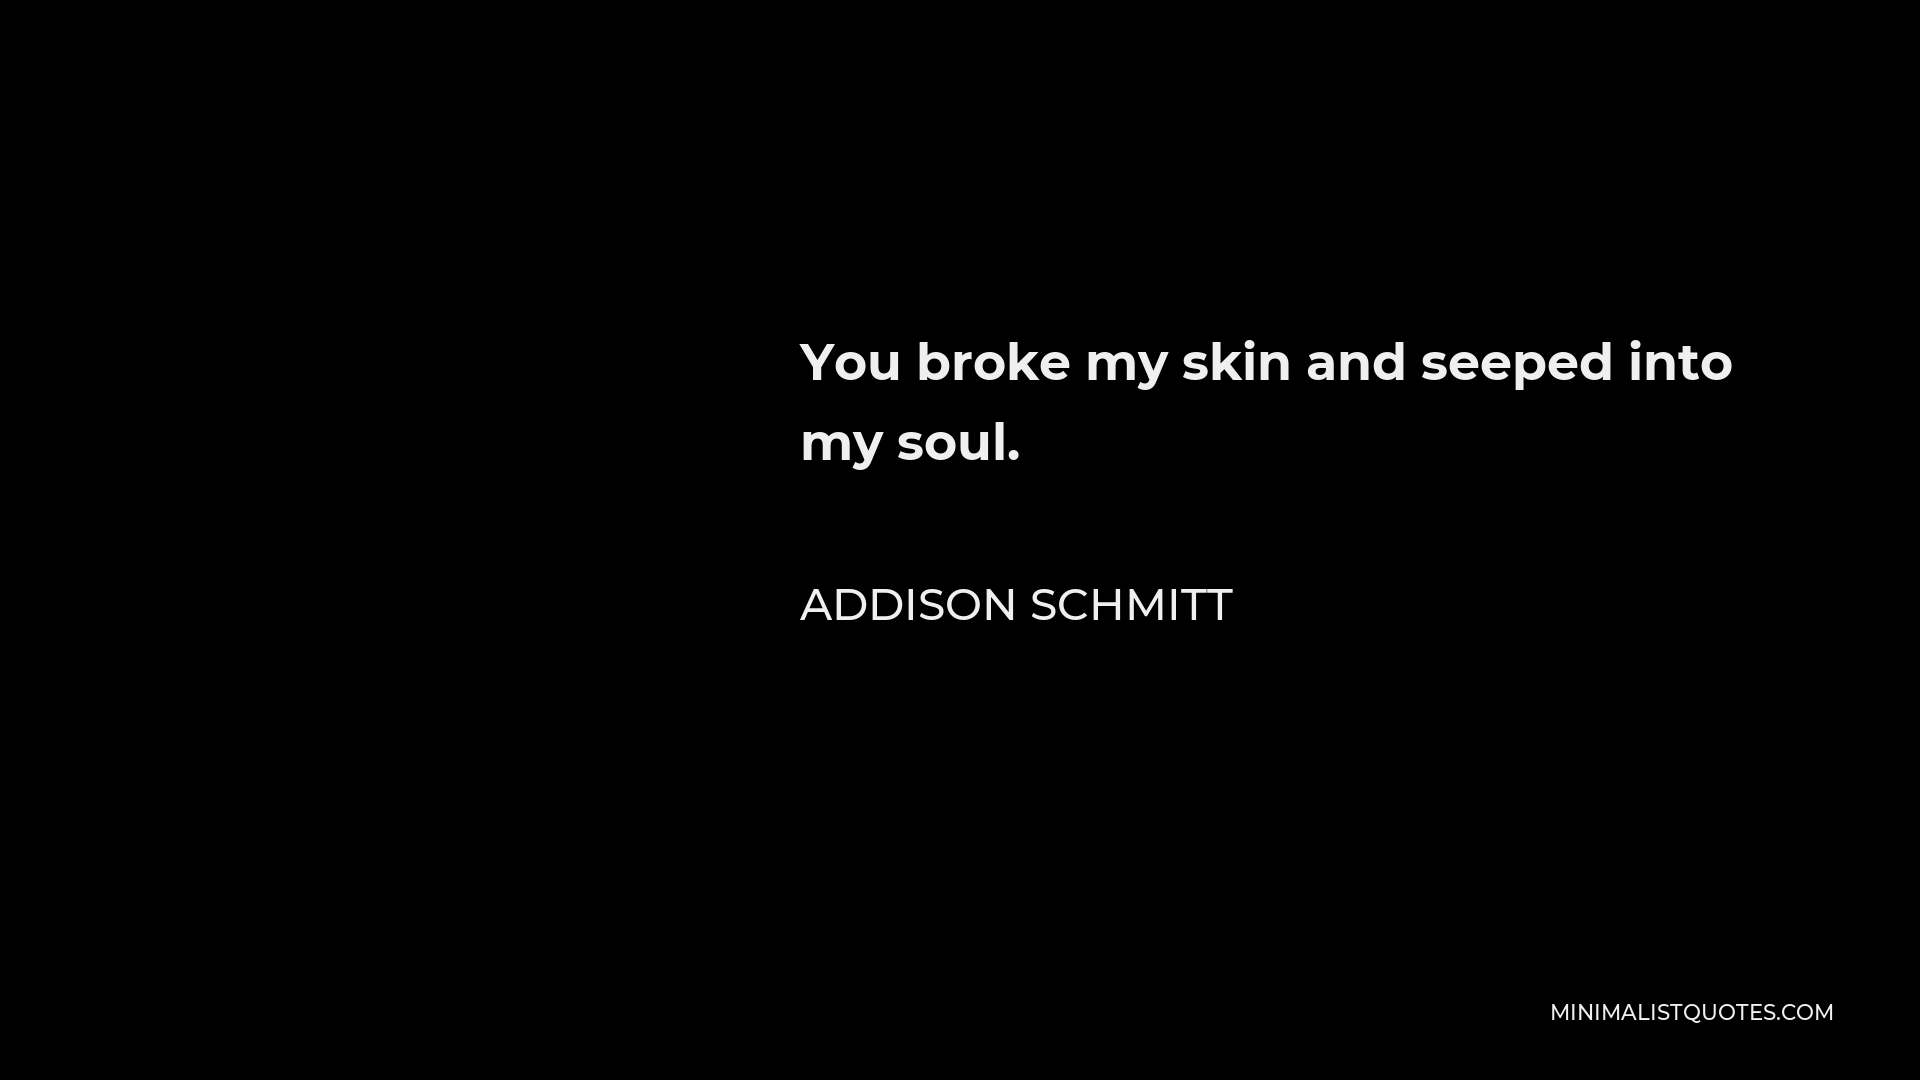 Addison Schmitt Quote - You broke my skin and seeped into my soul.